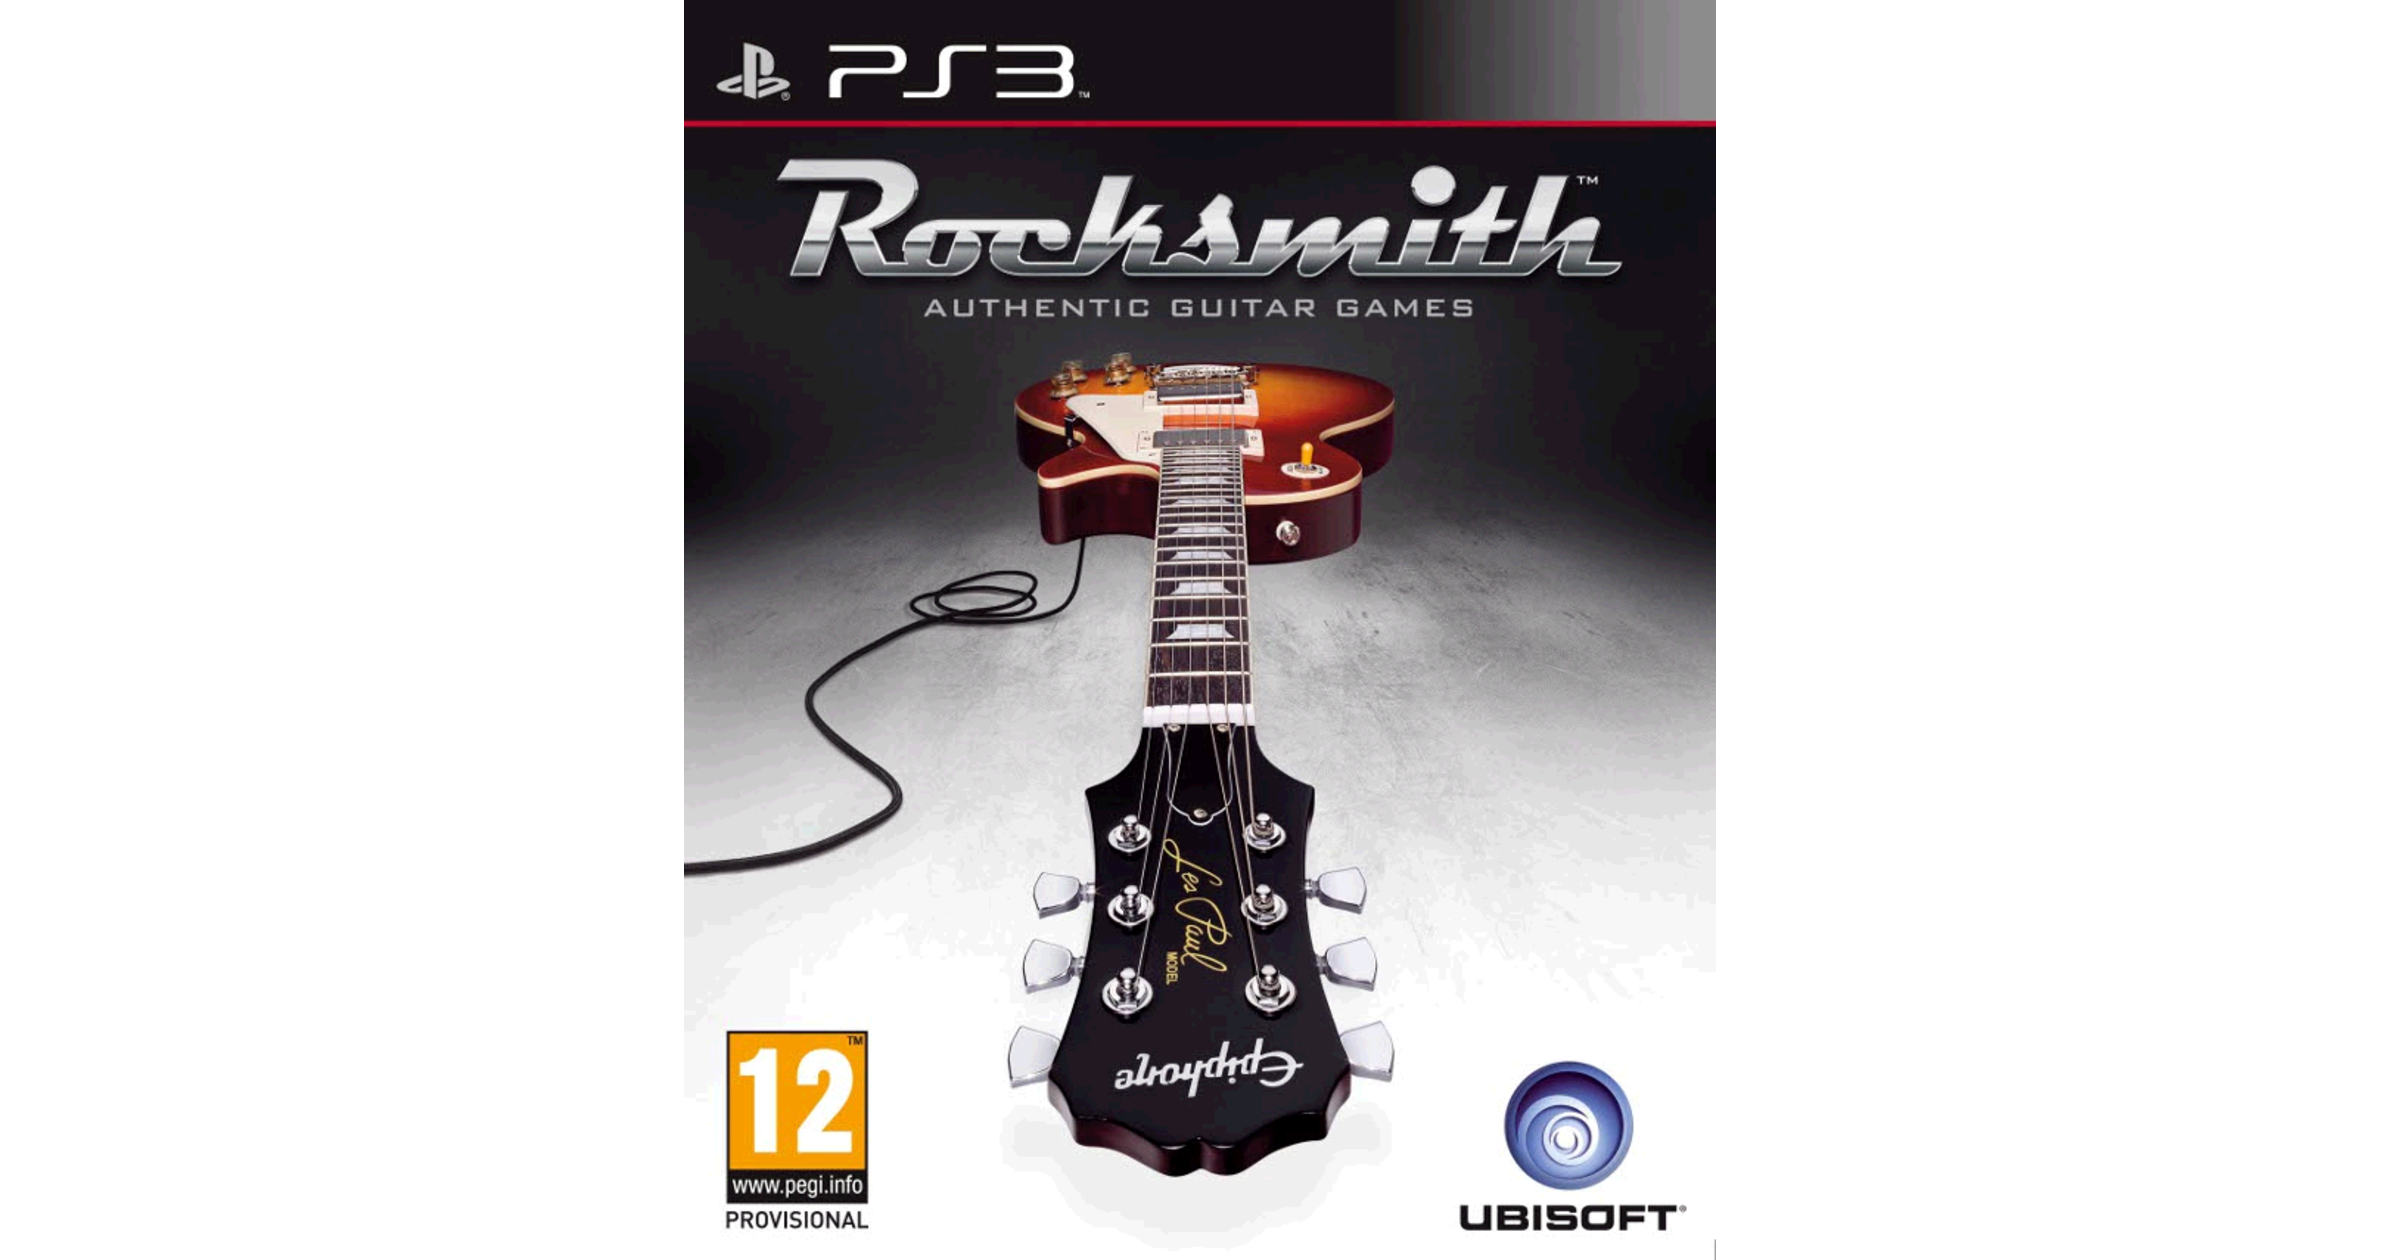 rocksmith 2014 no cable patch